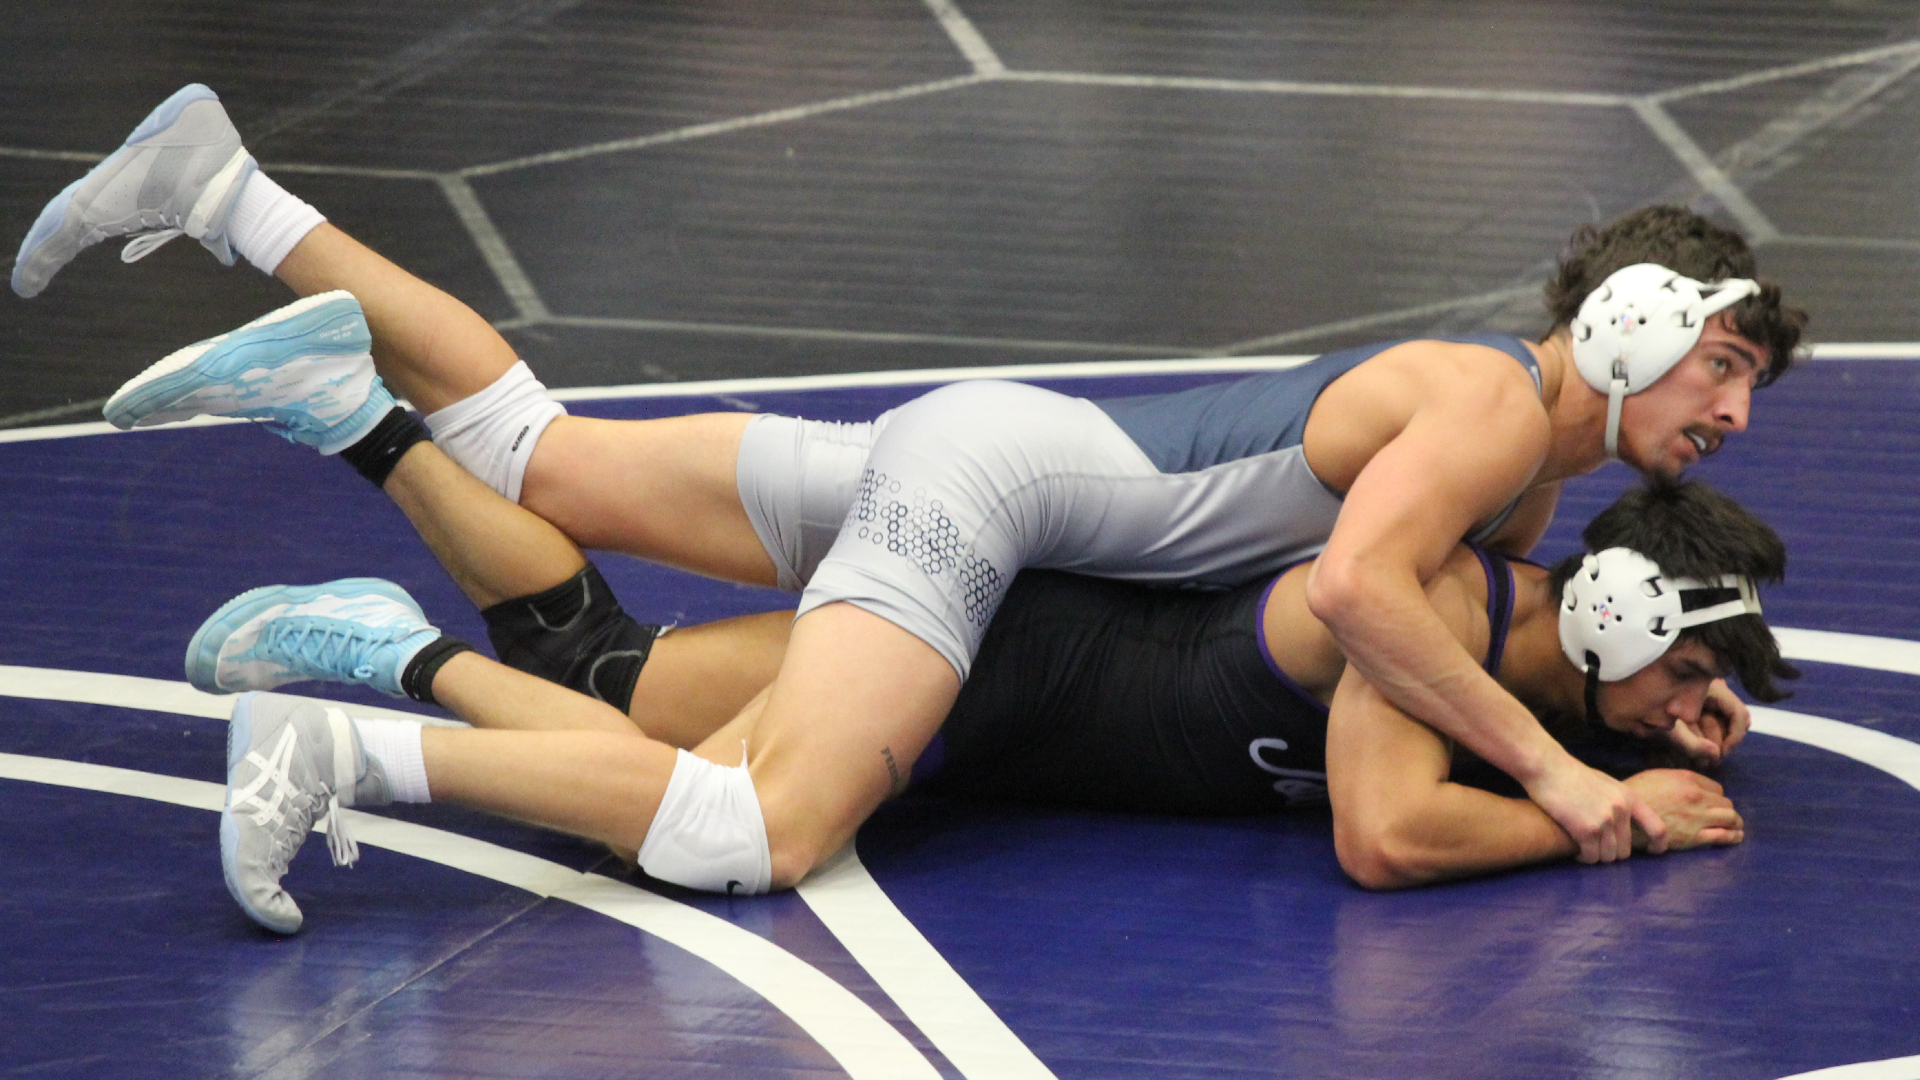 St. Ambrose competes in Reno Tournament of Champions